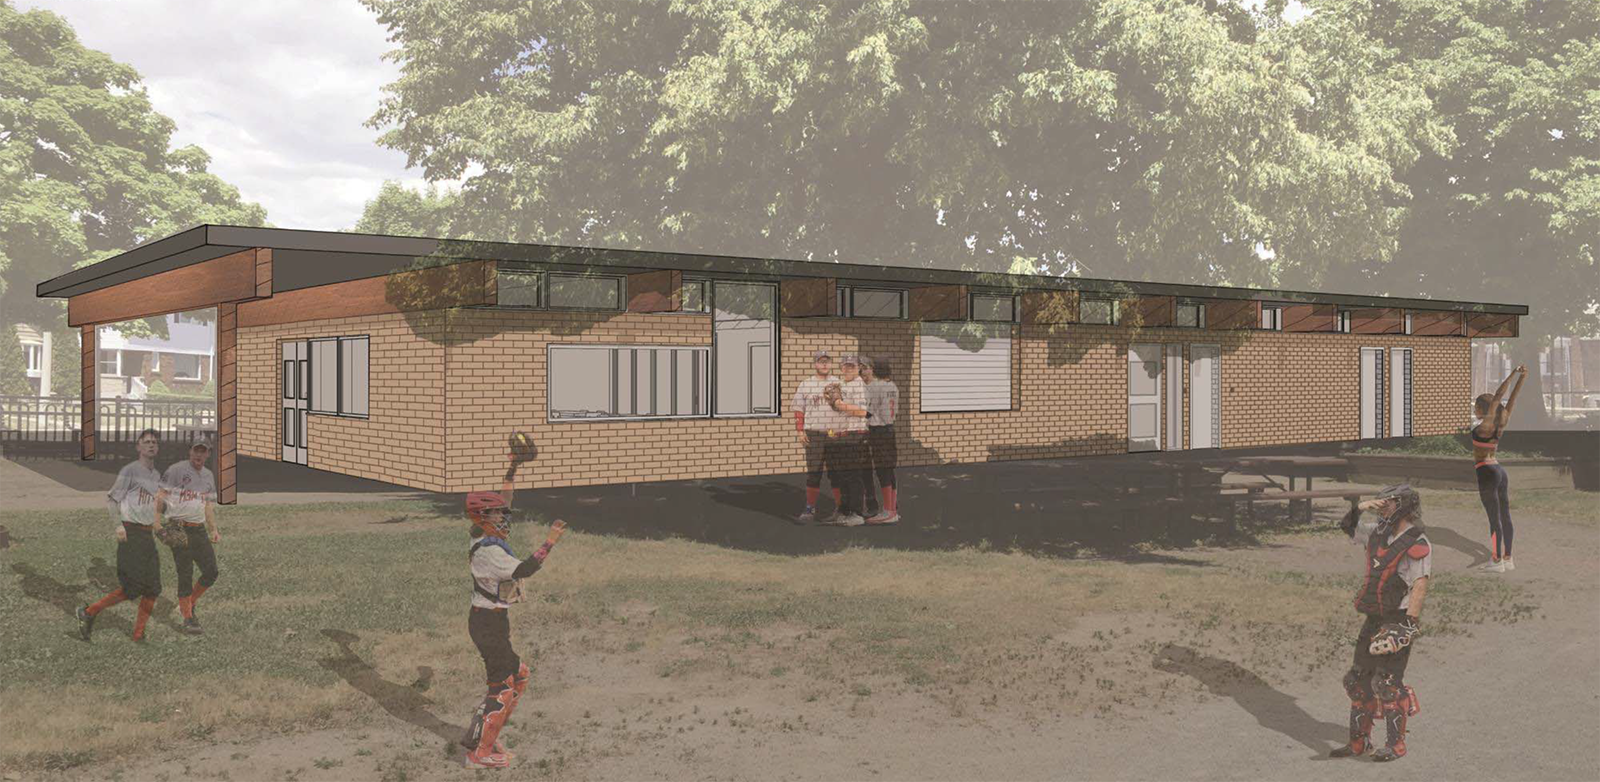 A rendering of the proposed design for the exterior of the Topham Park Clubhouse which includes new windows for improved energy efficiency